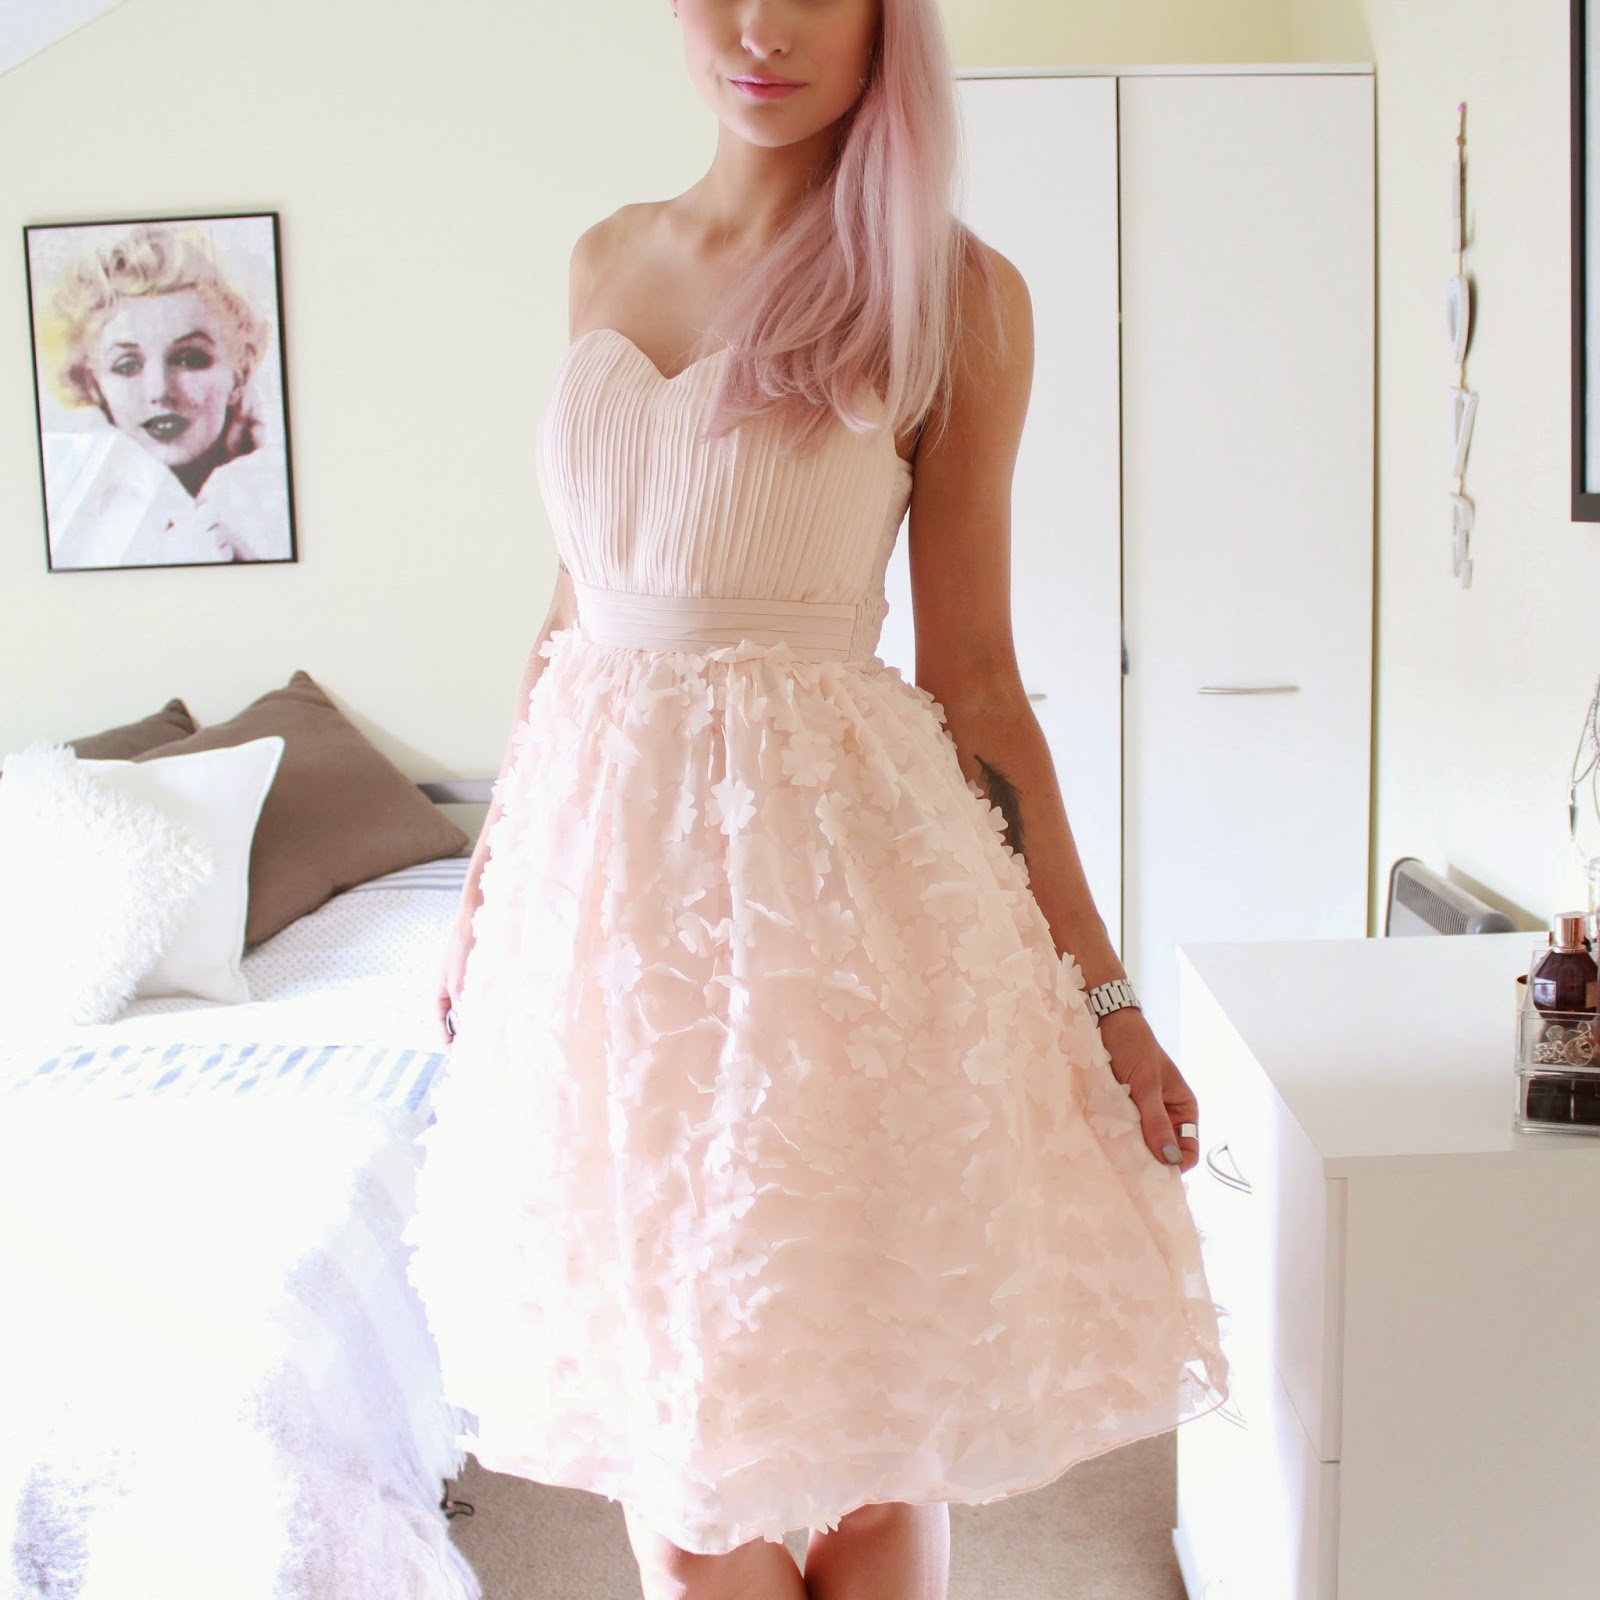 The Prettiest Dress in the World - Inthefrow